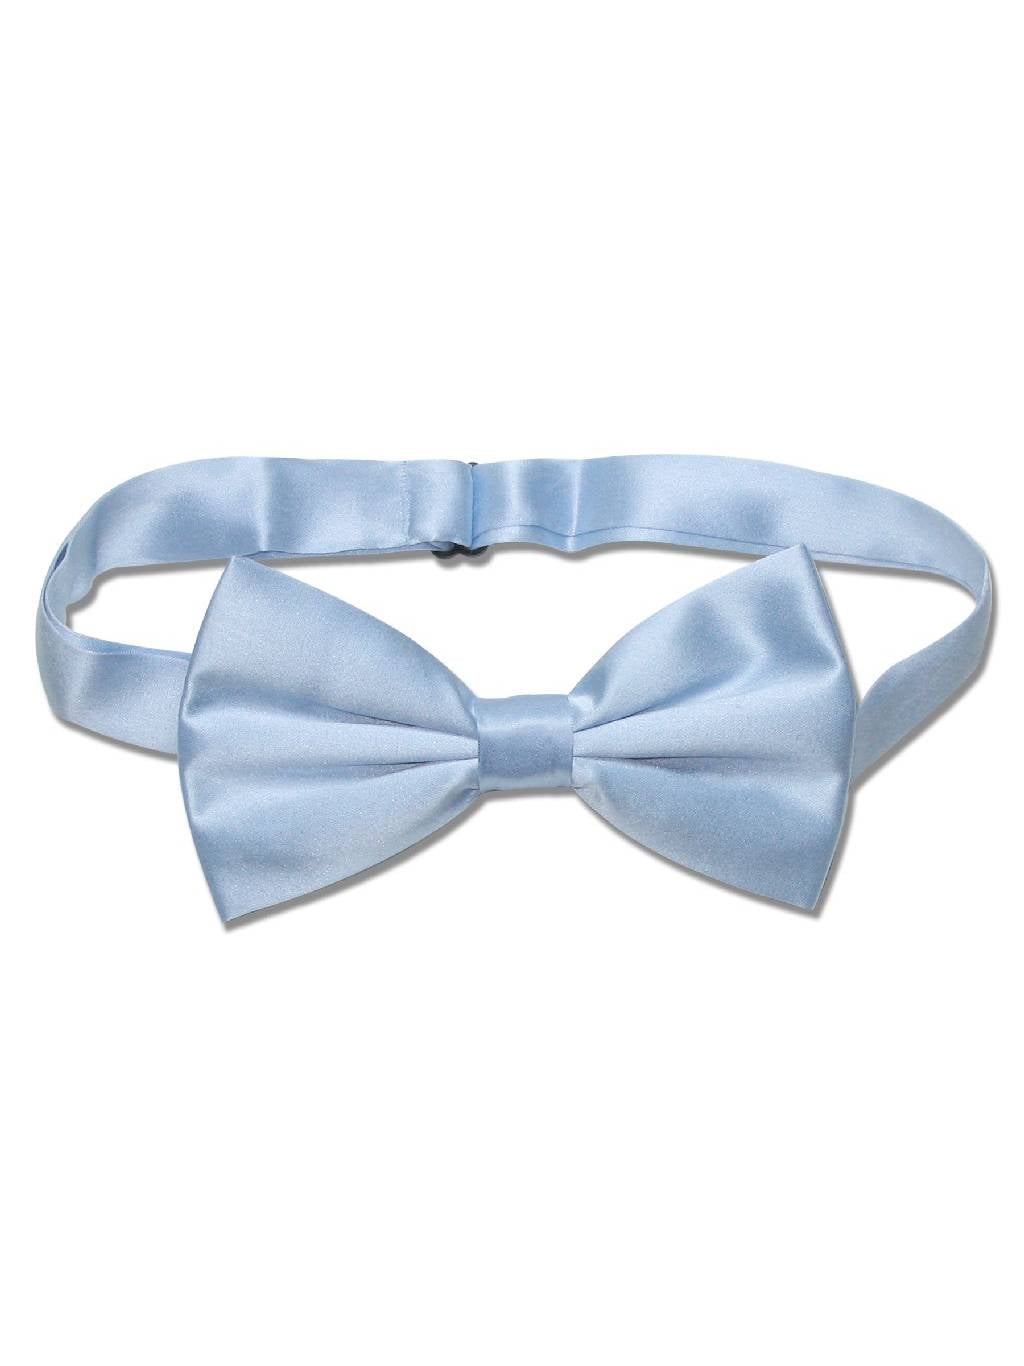 DQT Knit Knitted Plain Solid Baby Blue Classic Mens Pre-Tied Bow Tie 